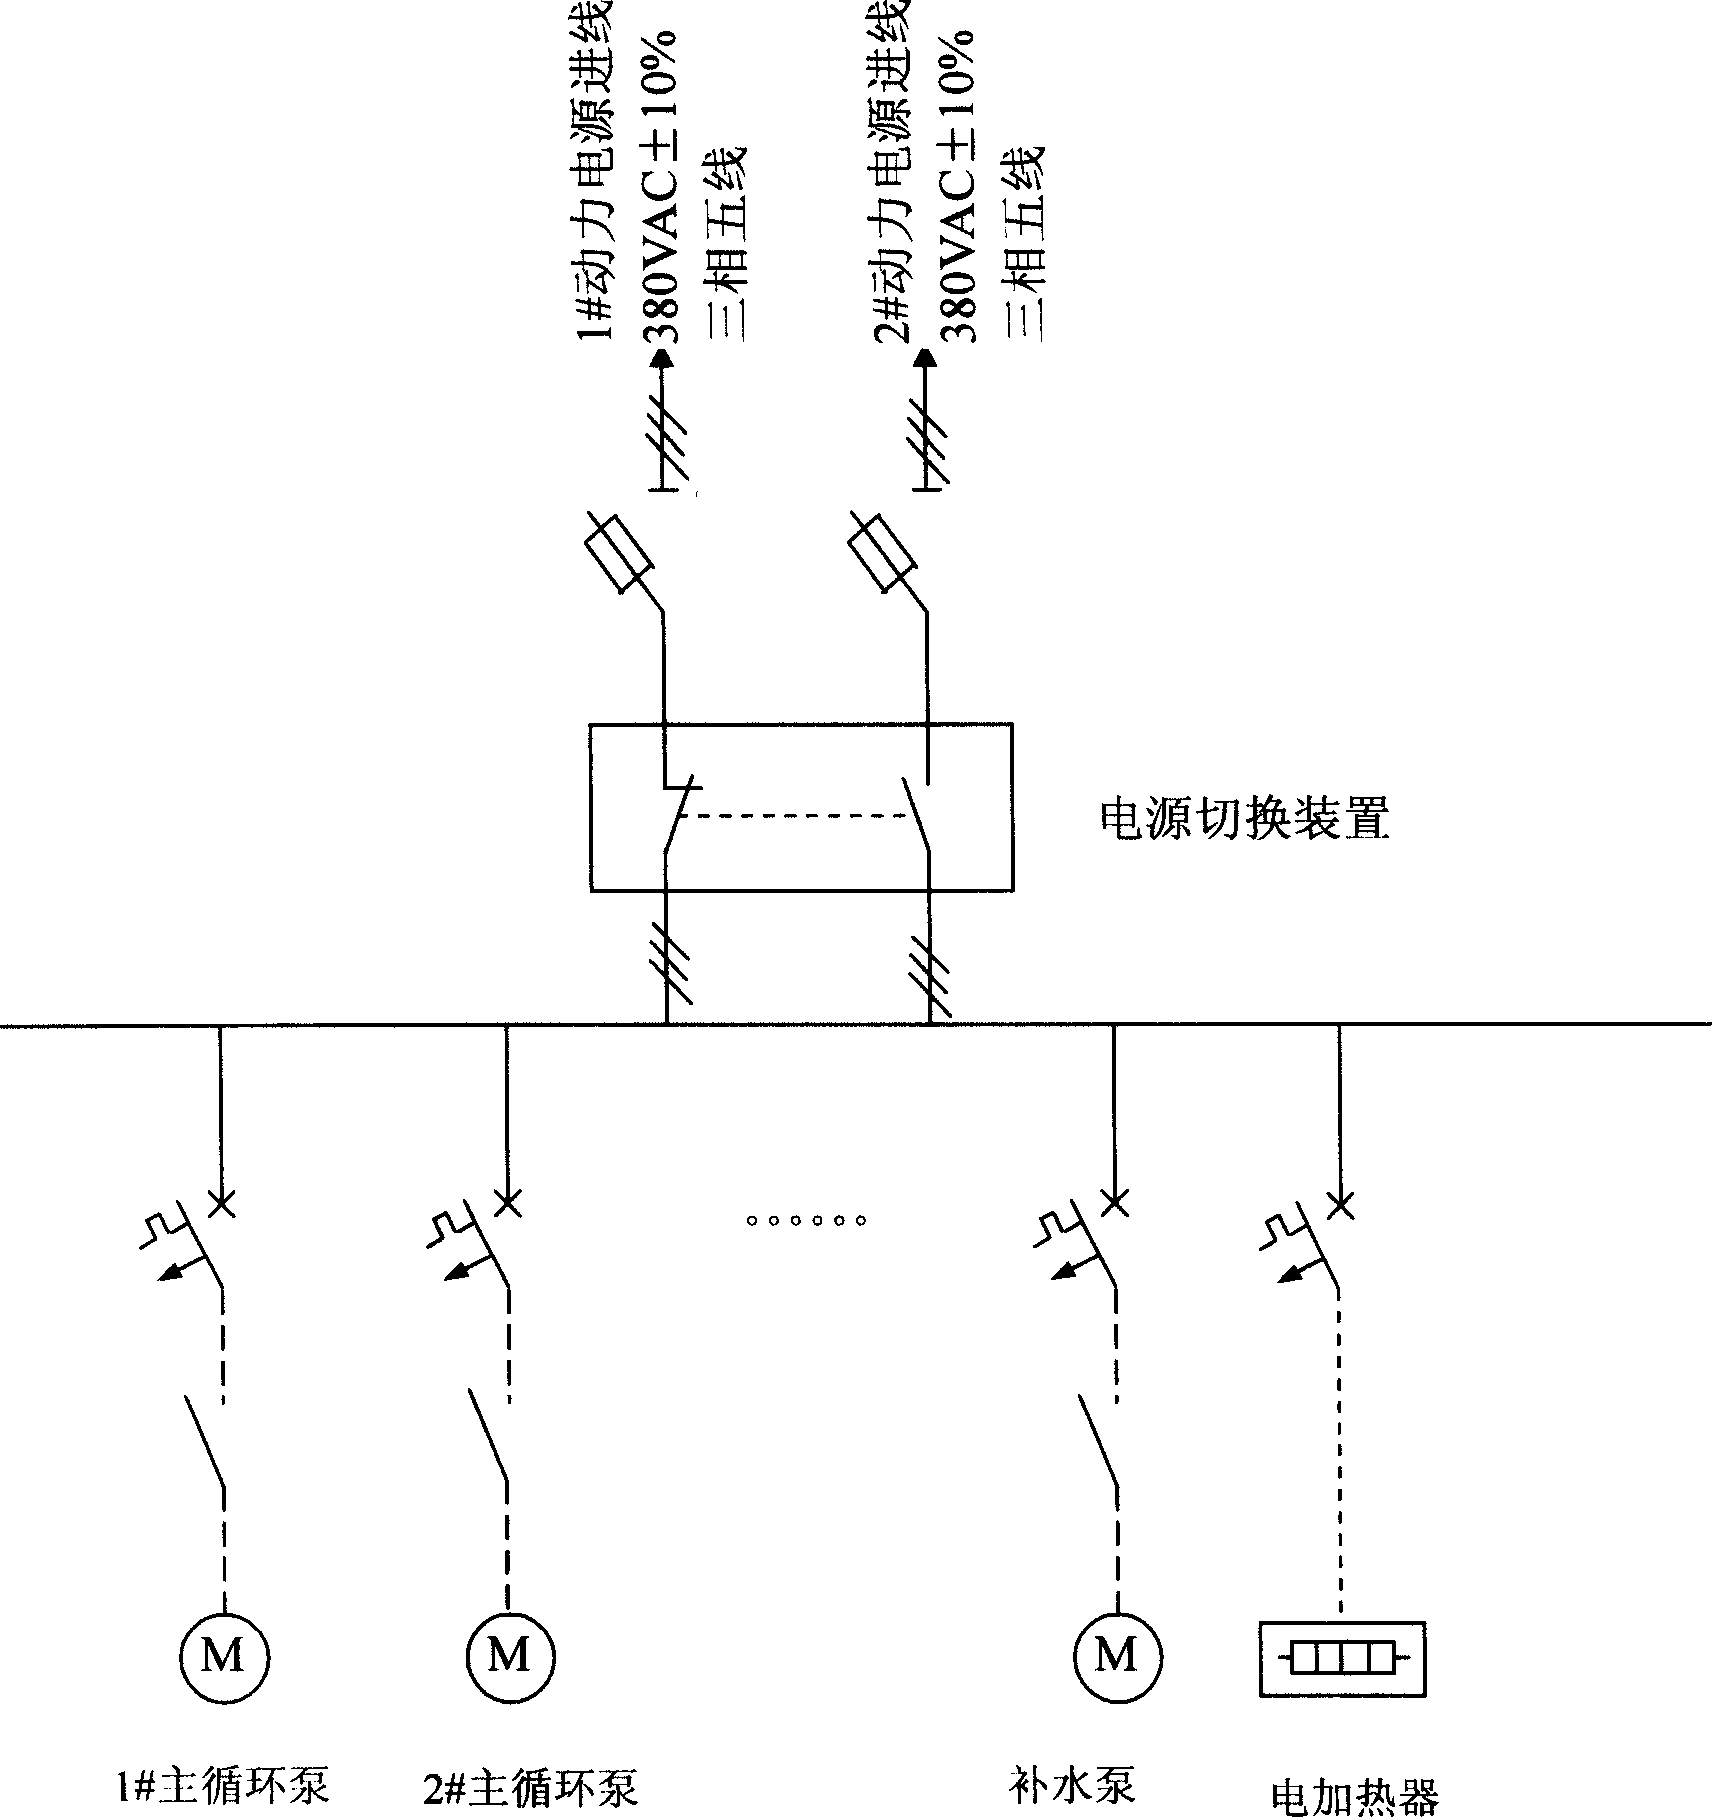 Control system of hermetic circulating type pure water cooling device for thyristor valve set